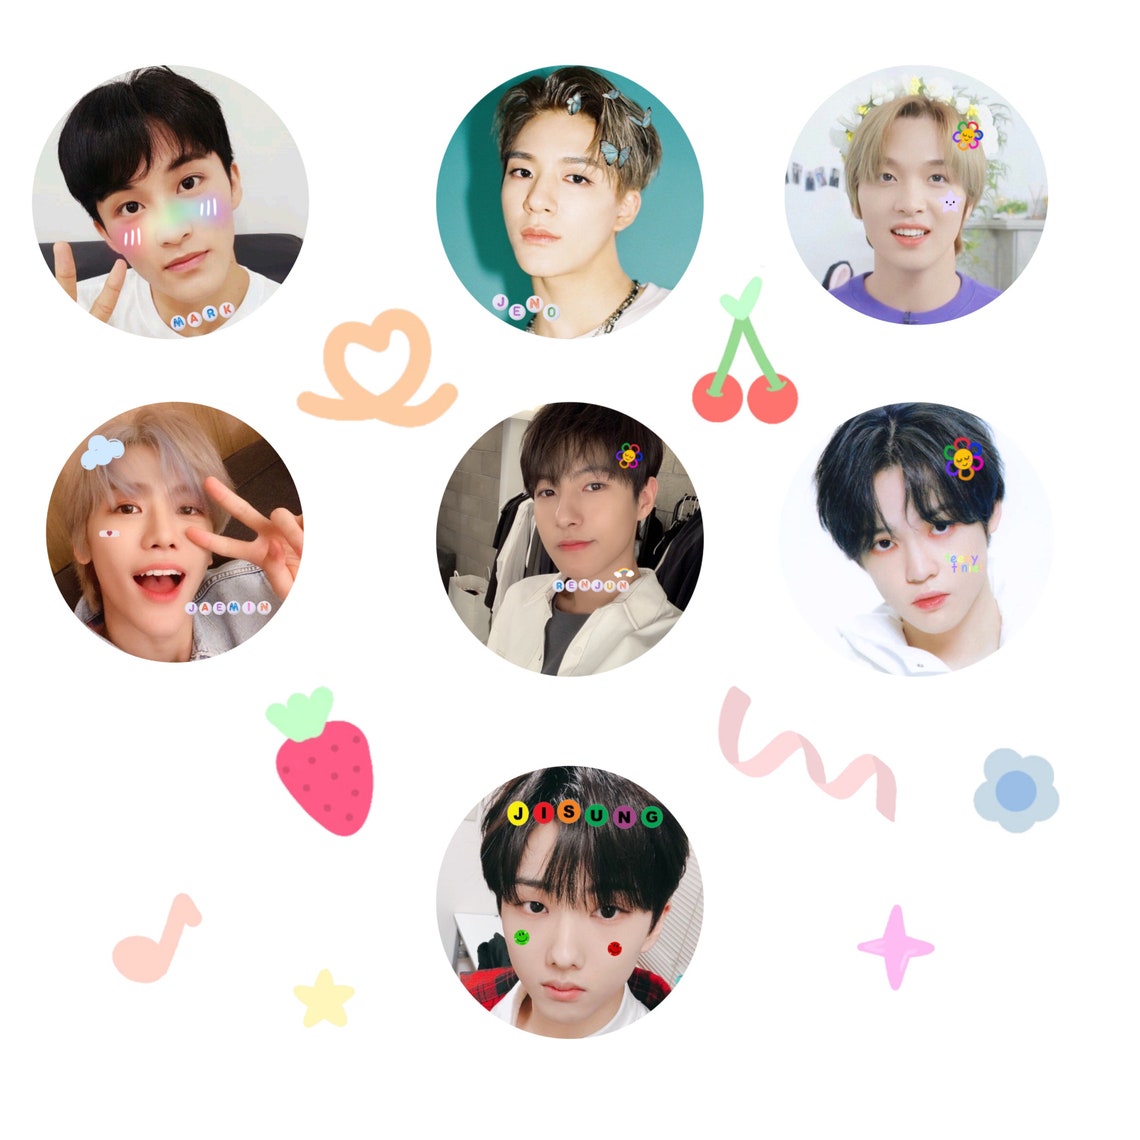 Nct dream stickers nct stickers kpop stickers | Etsy